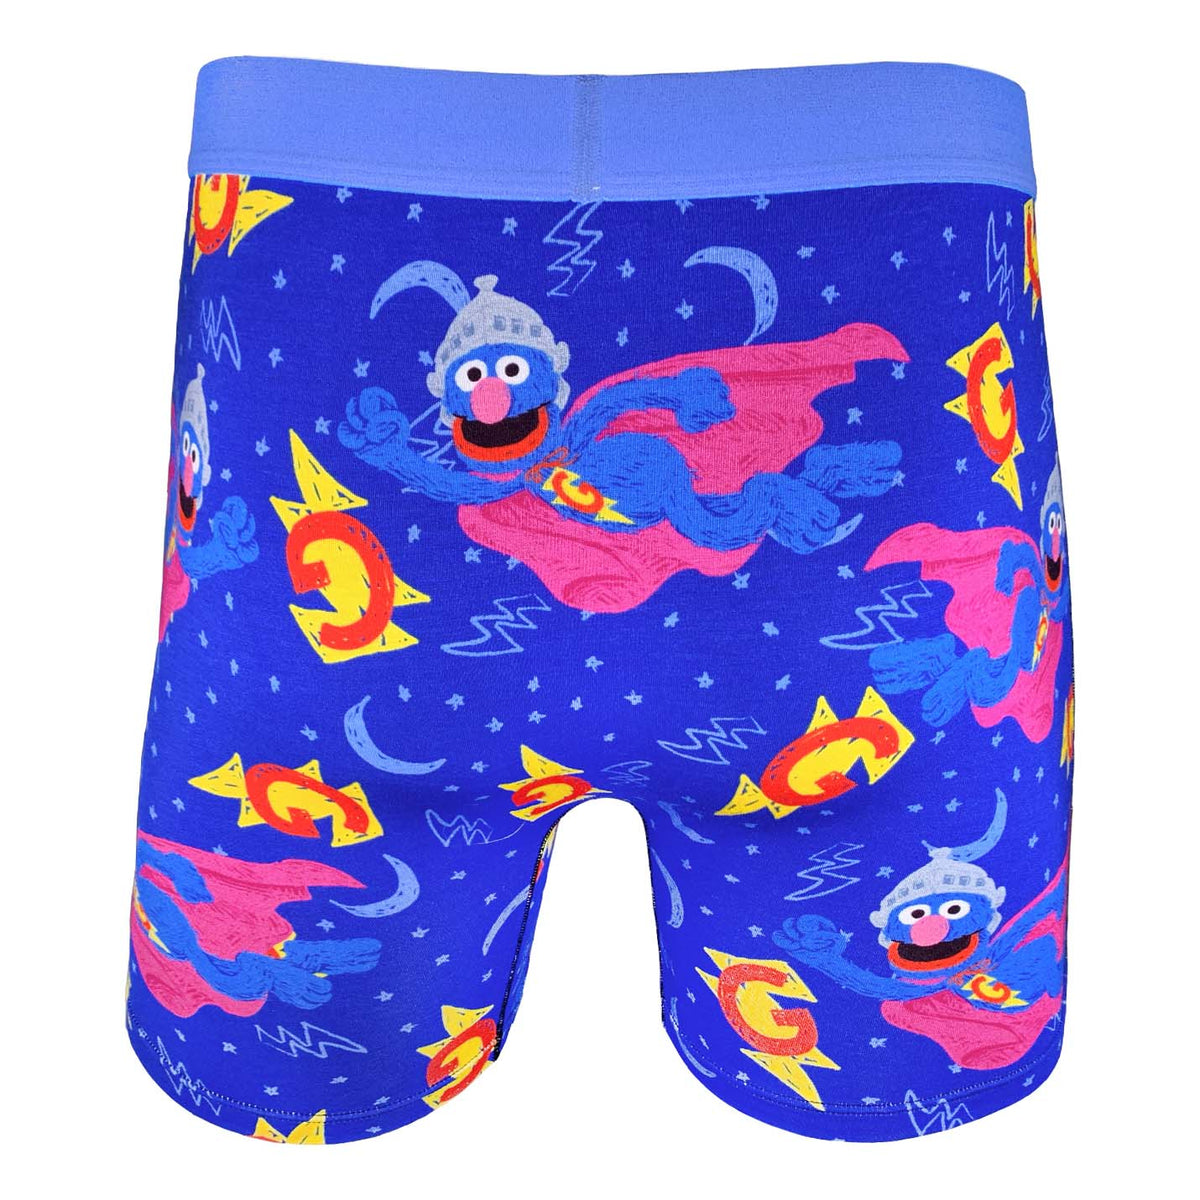  Boxer Shorts, Men's Sesame Street, Cookie Monster Boxer  Briefs, Underwear, Open Front, Square Pants, Good Underwear, Soft  Underwear, Breathable, Sweat Absorbent, 3D Structure, Large Size,  Antibacterial, Odor-Resistant, Stylish, Solid